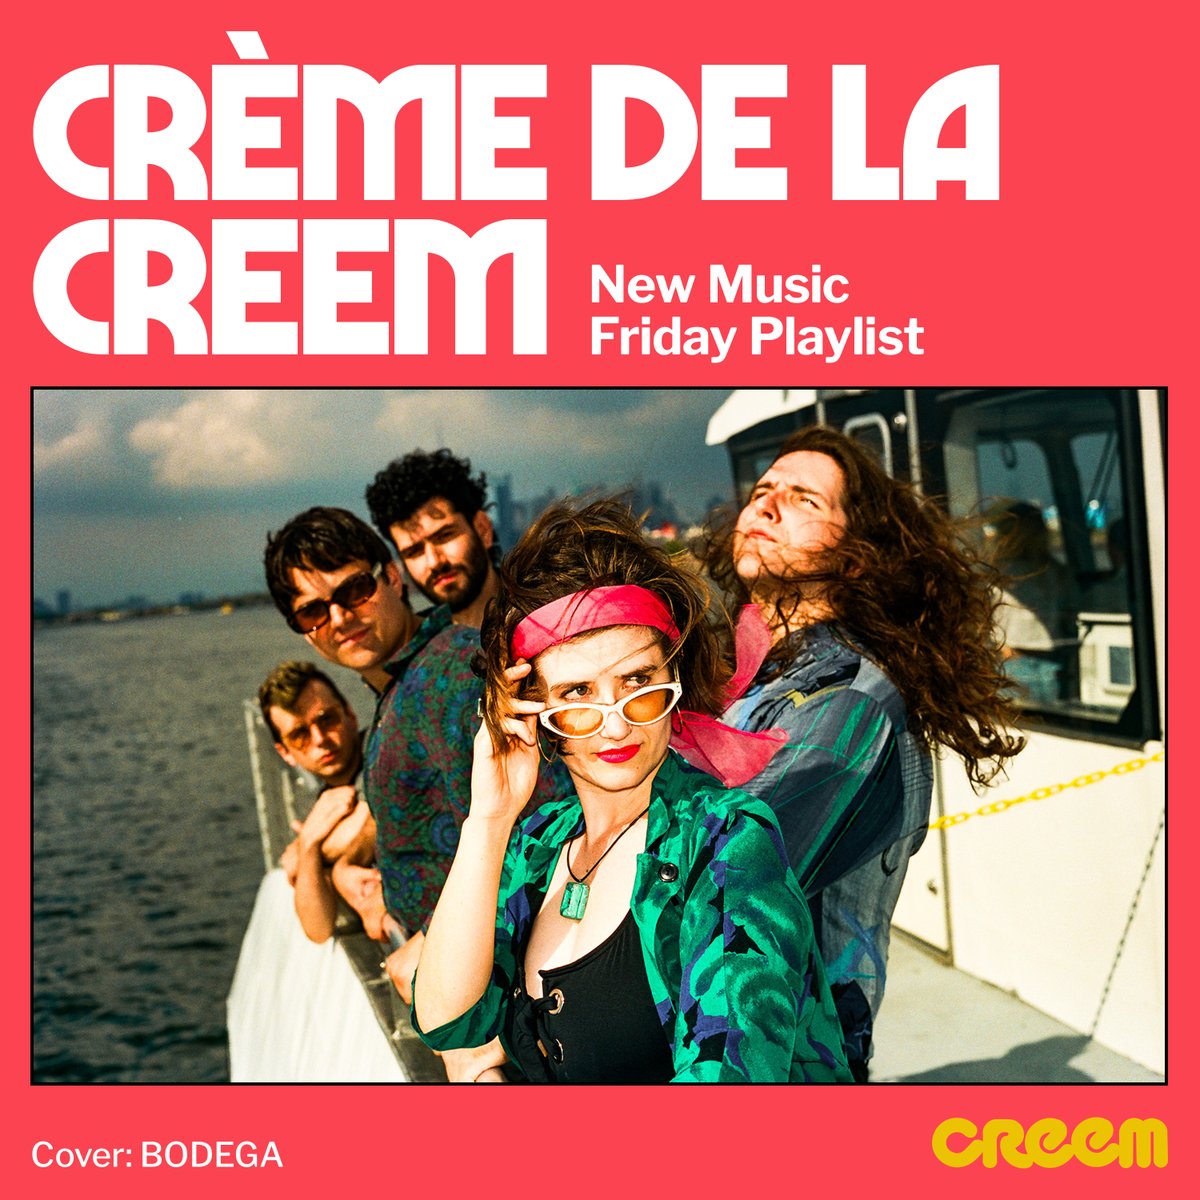 The best of this week's new music. Curated by the dumb-dumbs at CREEM: linktr.ee/creemplaylist Feat. BODEGA @marbledeye @thedandywarhols @khruangbin + more!